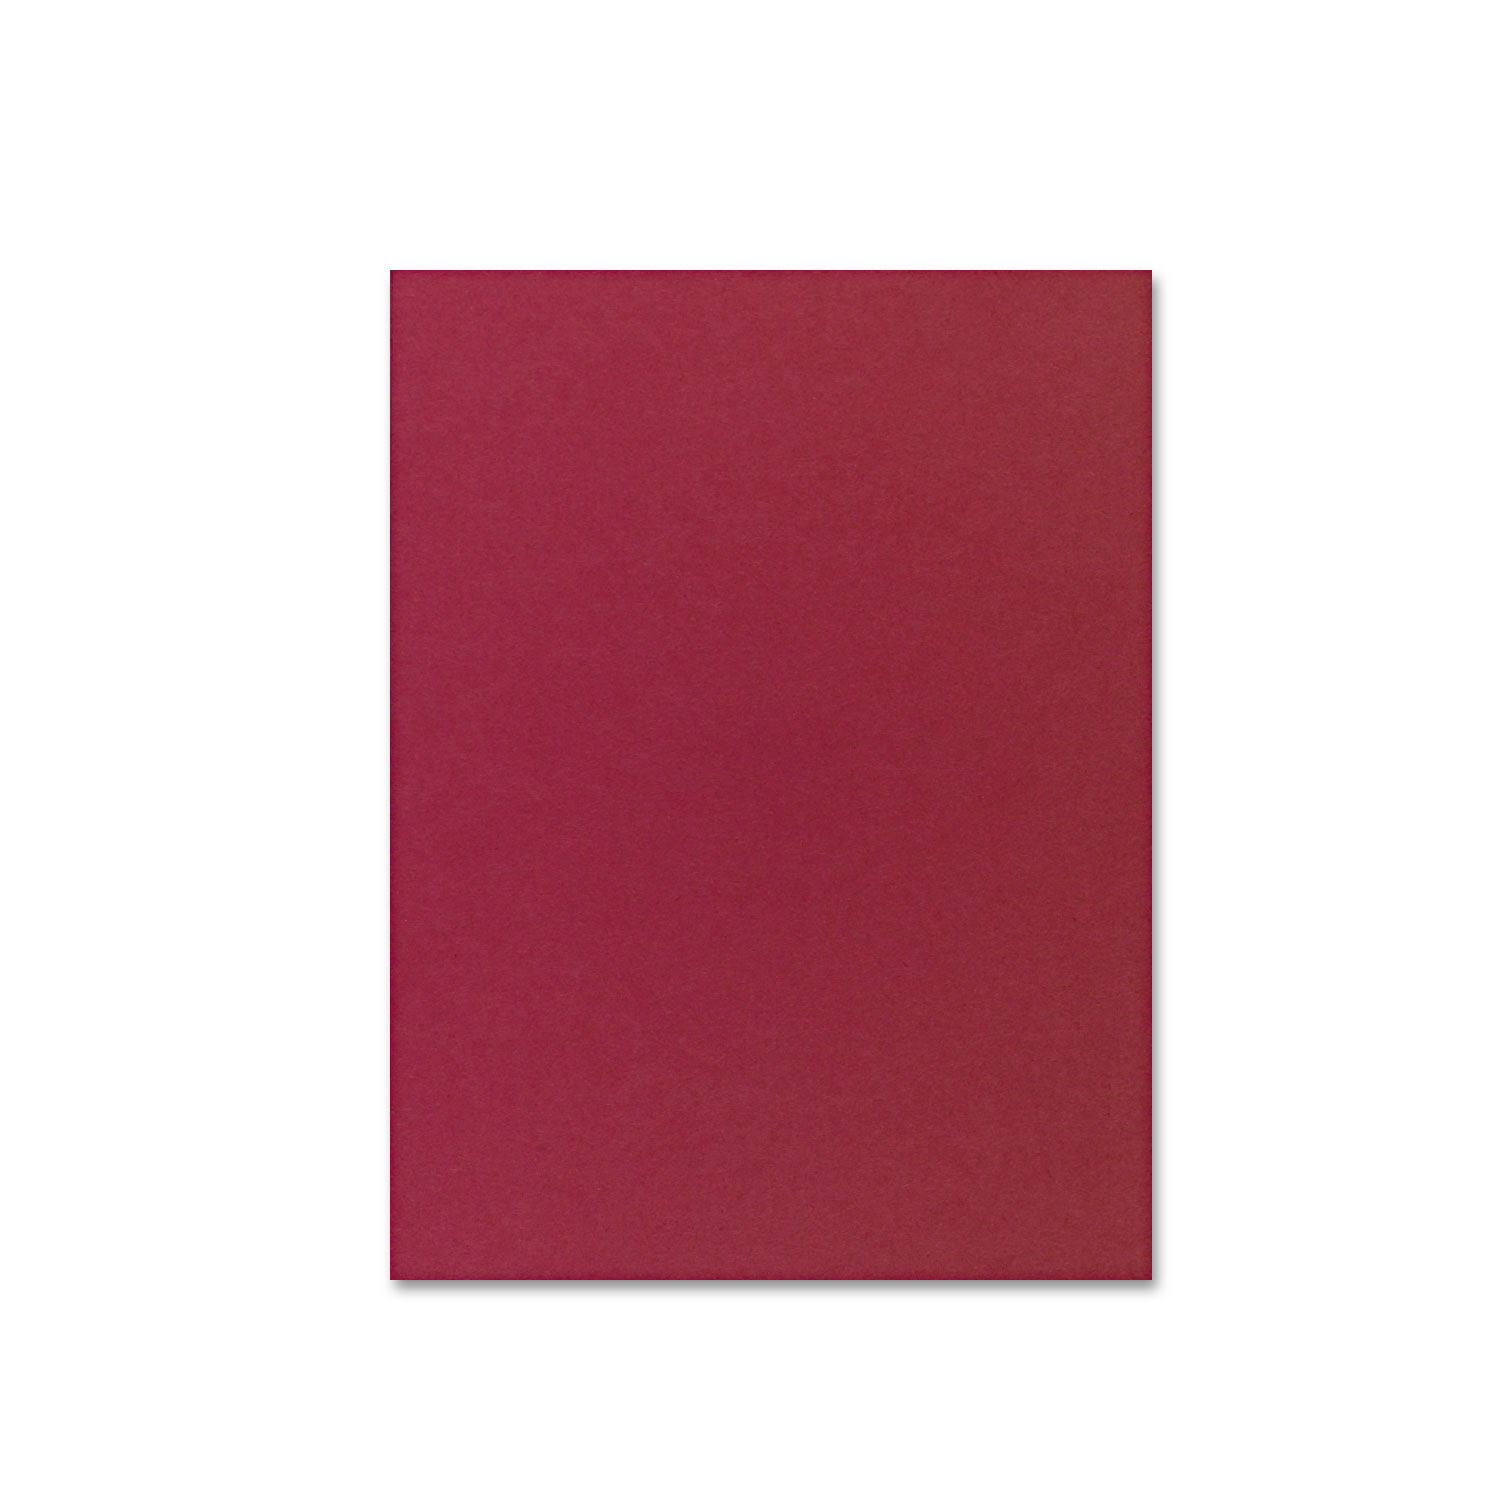 Riverside Construction Paper, 76 lbs., 9 x 12, Red, 50 Sheets/Pack